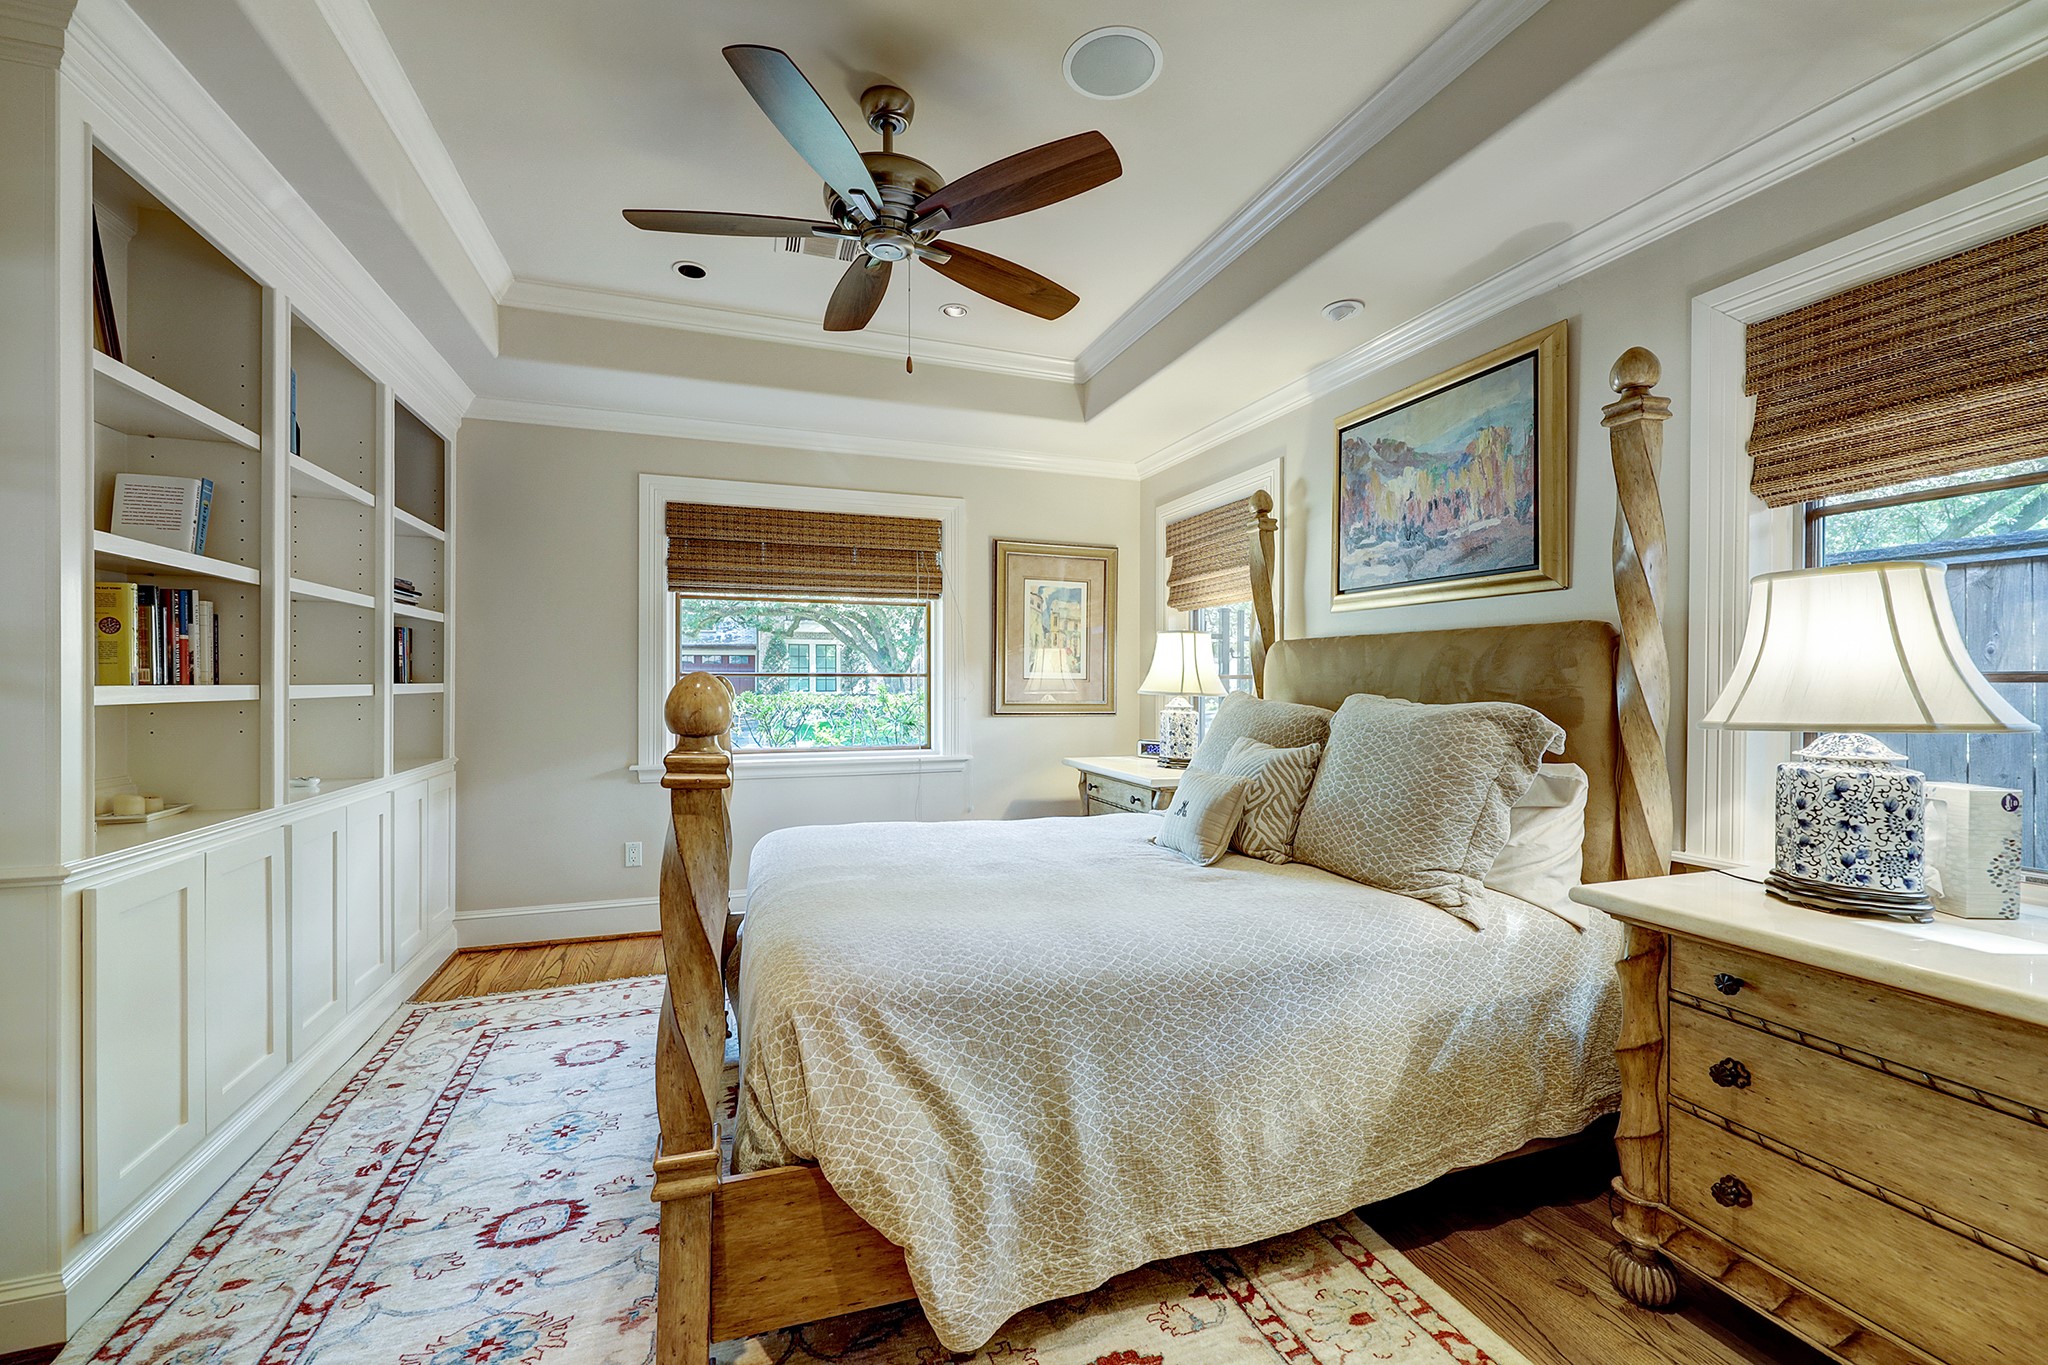 Secondary bedroom with tray ceiling, custom built-ins, and nice size closet.